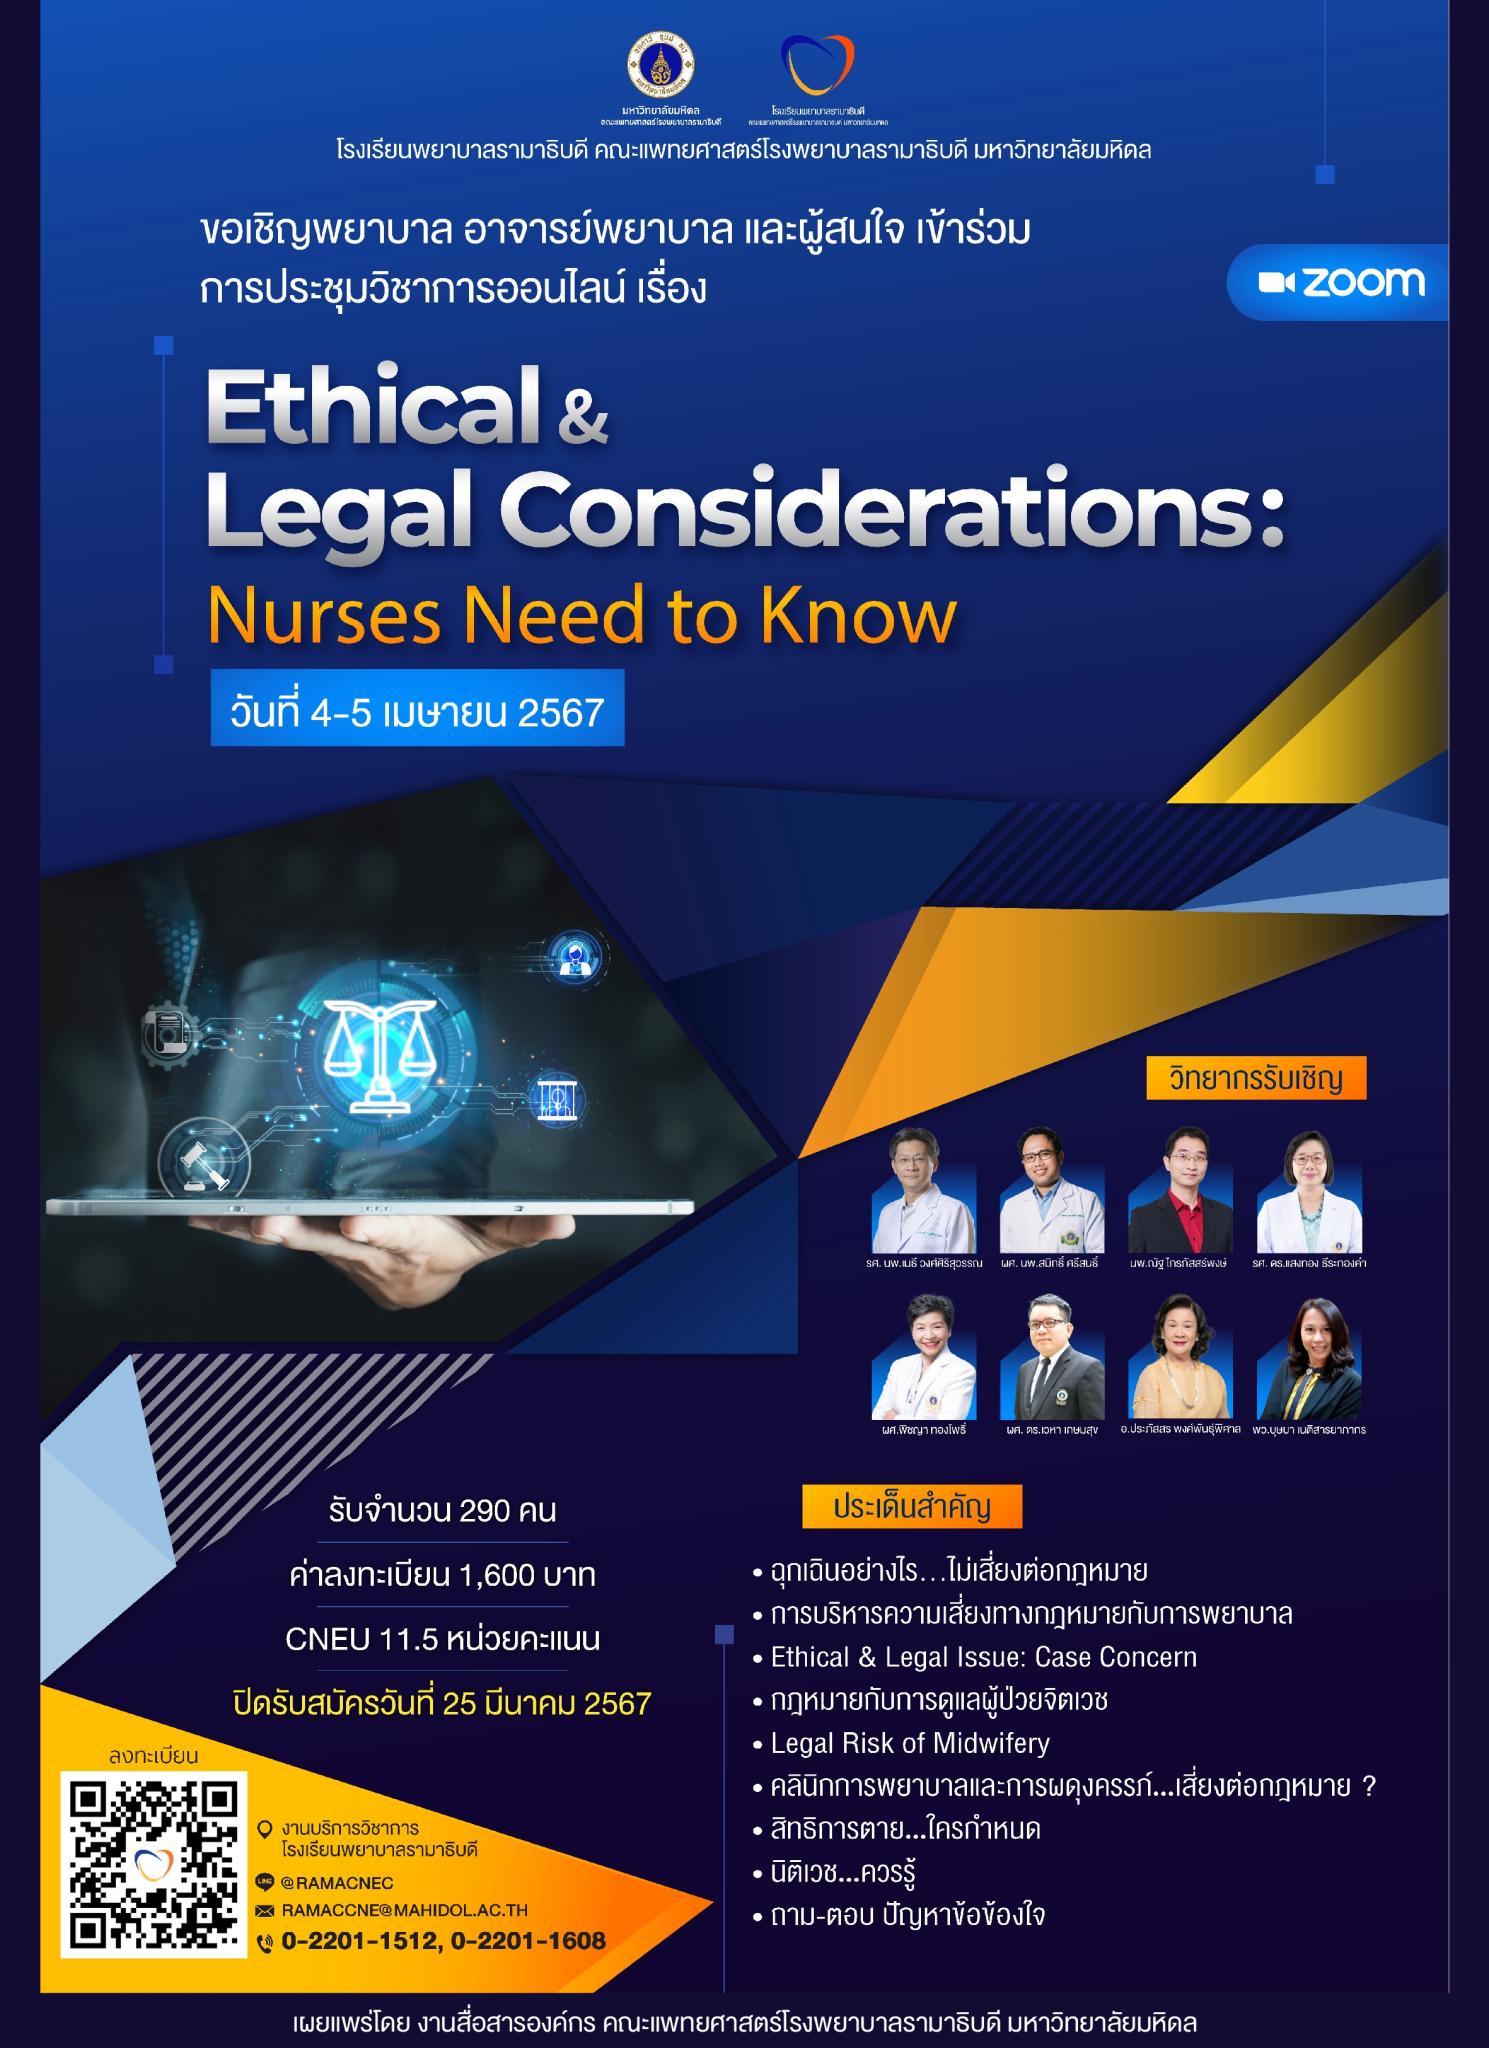 Ethical & Legal Considerations: Nurse Need to Know